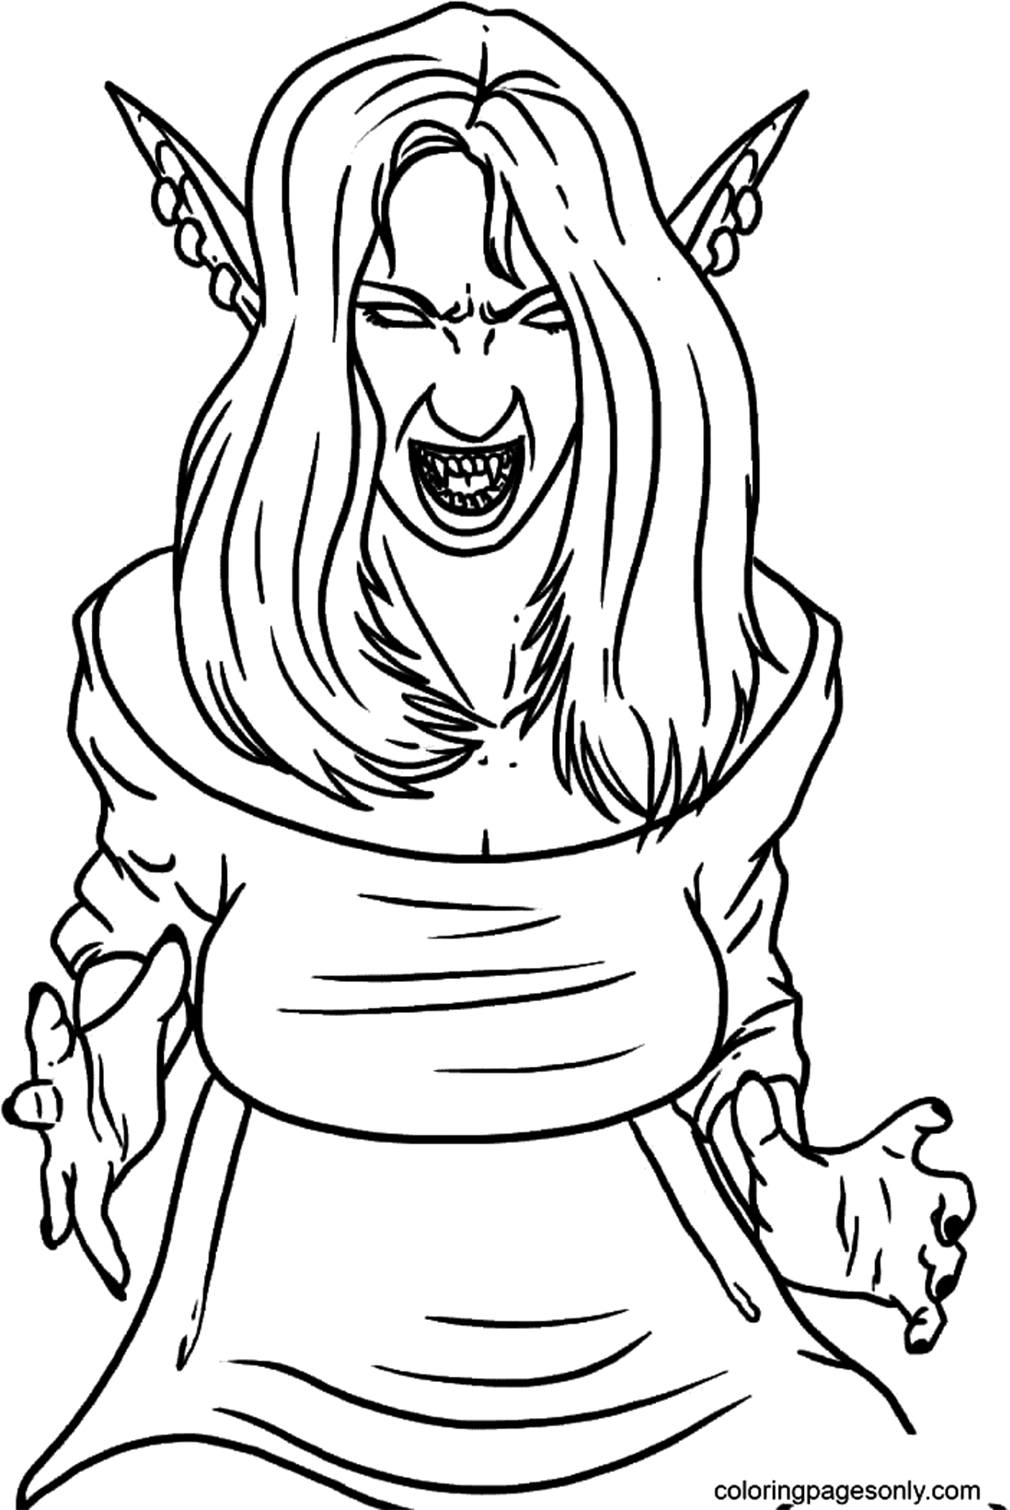 Girl Vampire Coloring Page